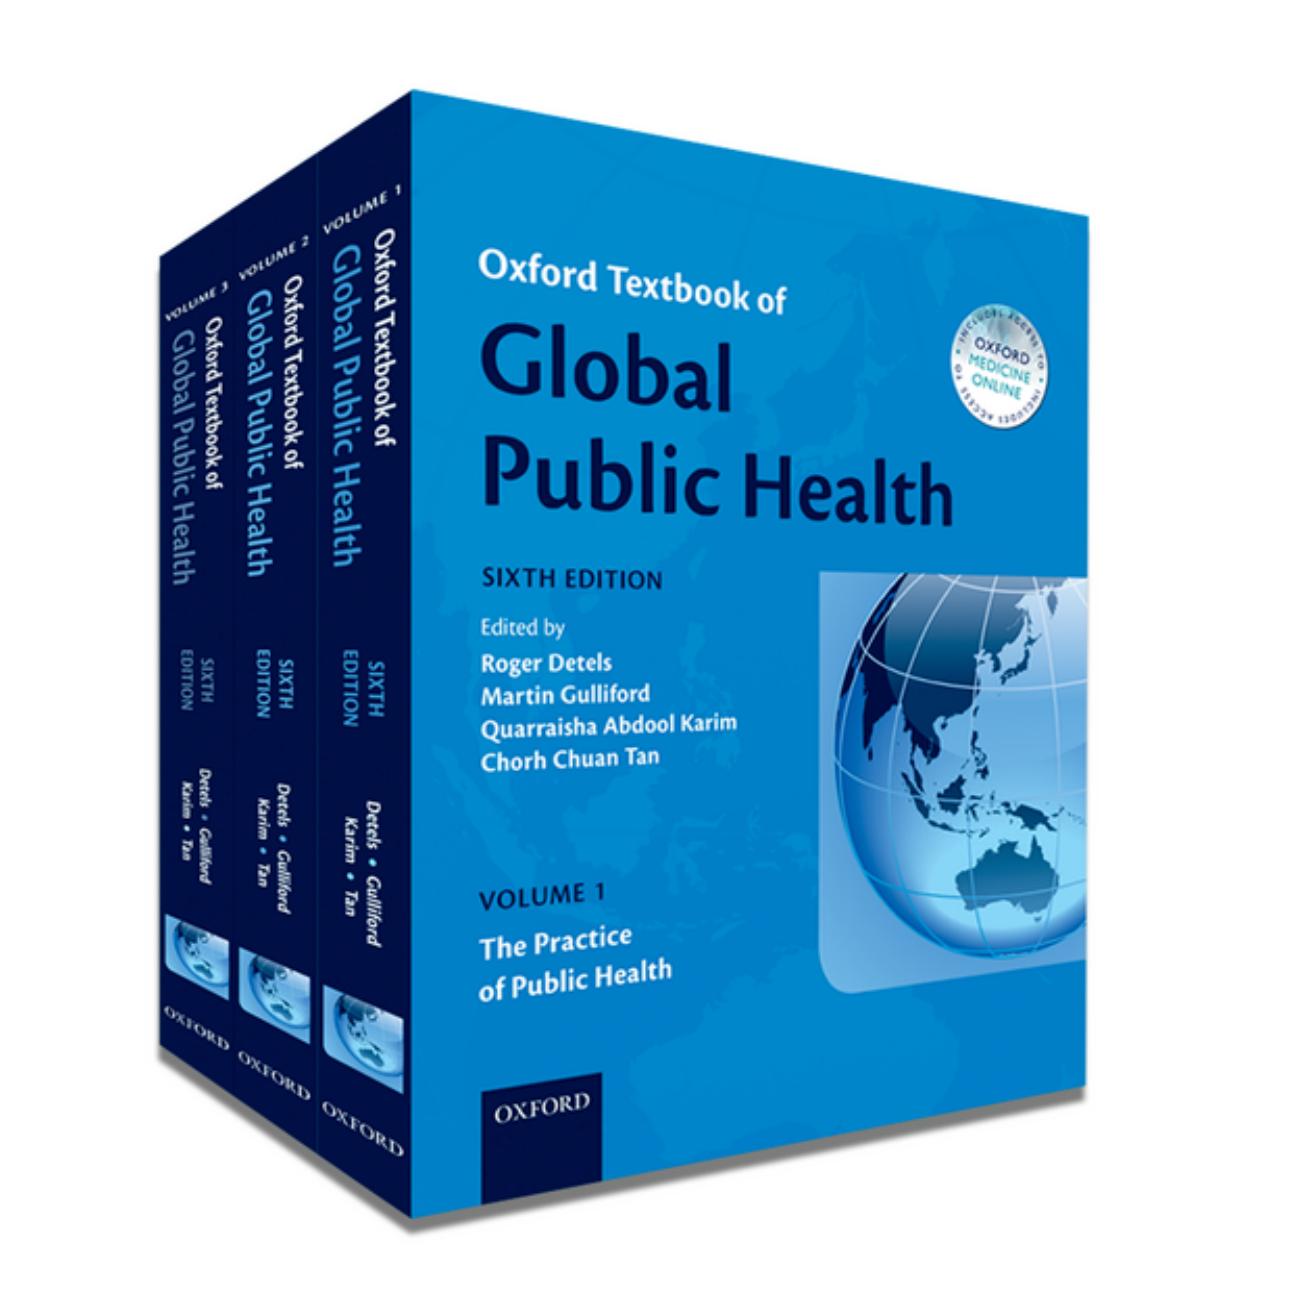 Oxford Textbook of Global Public Health